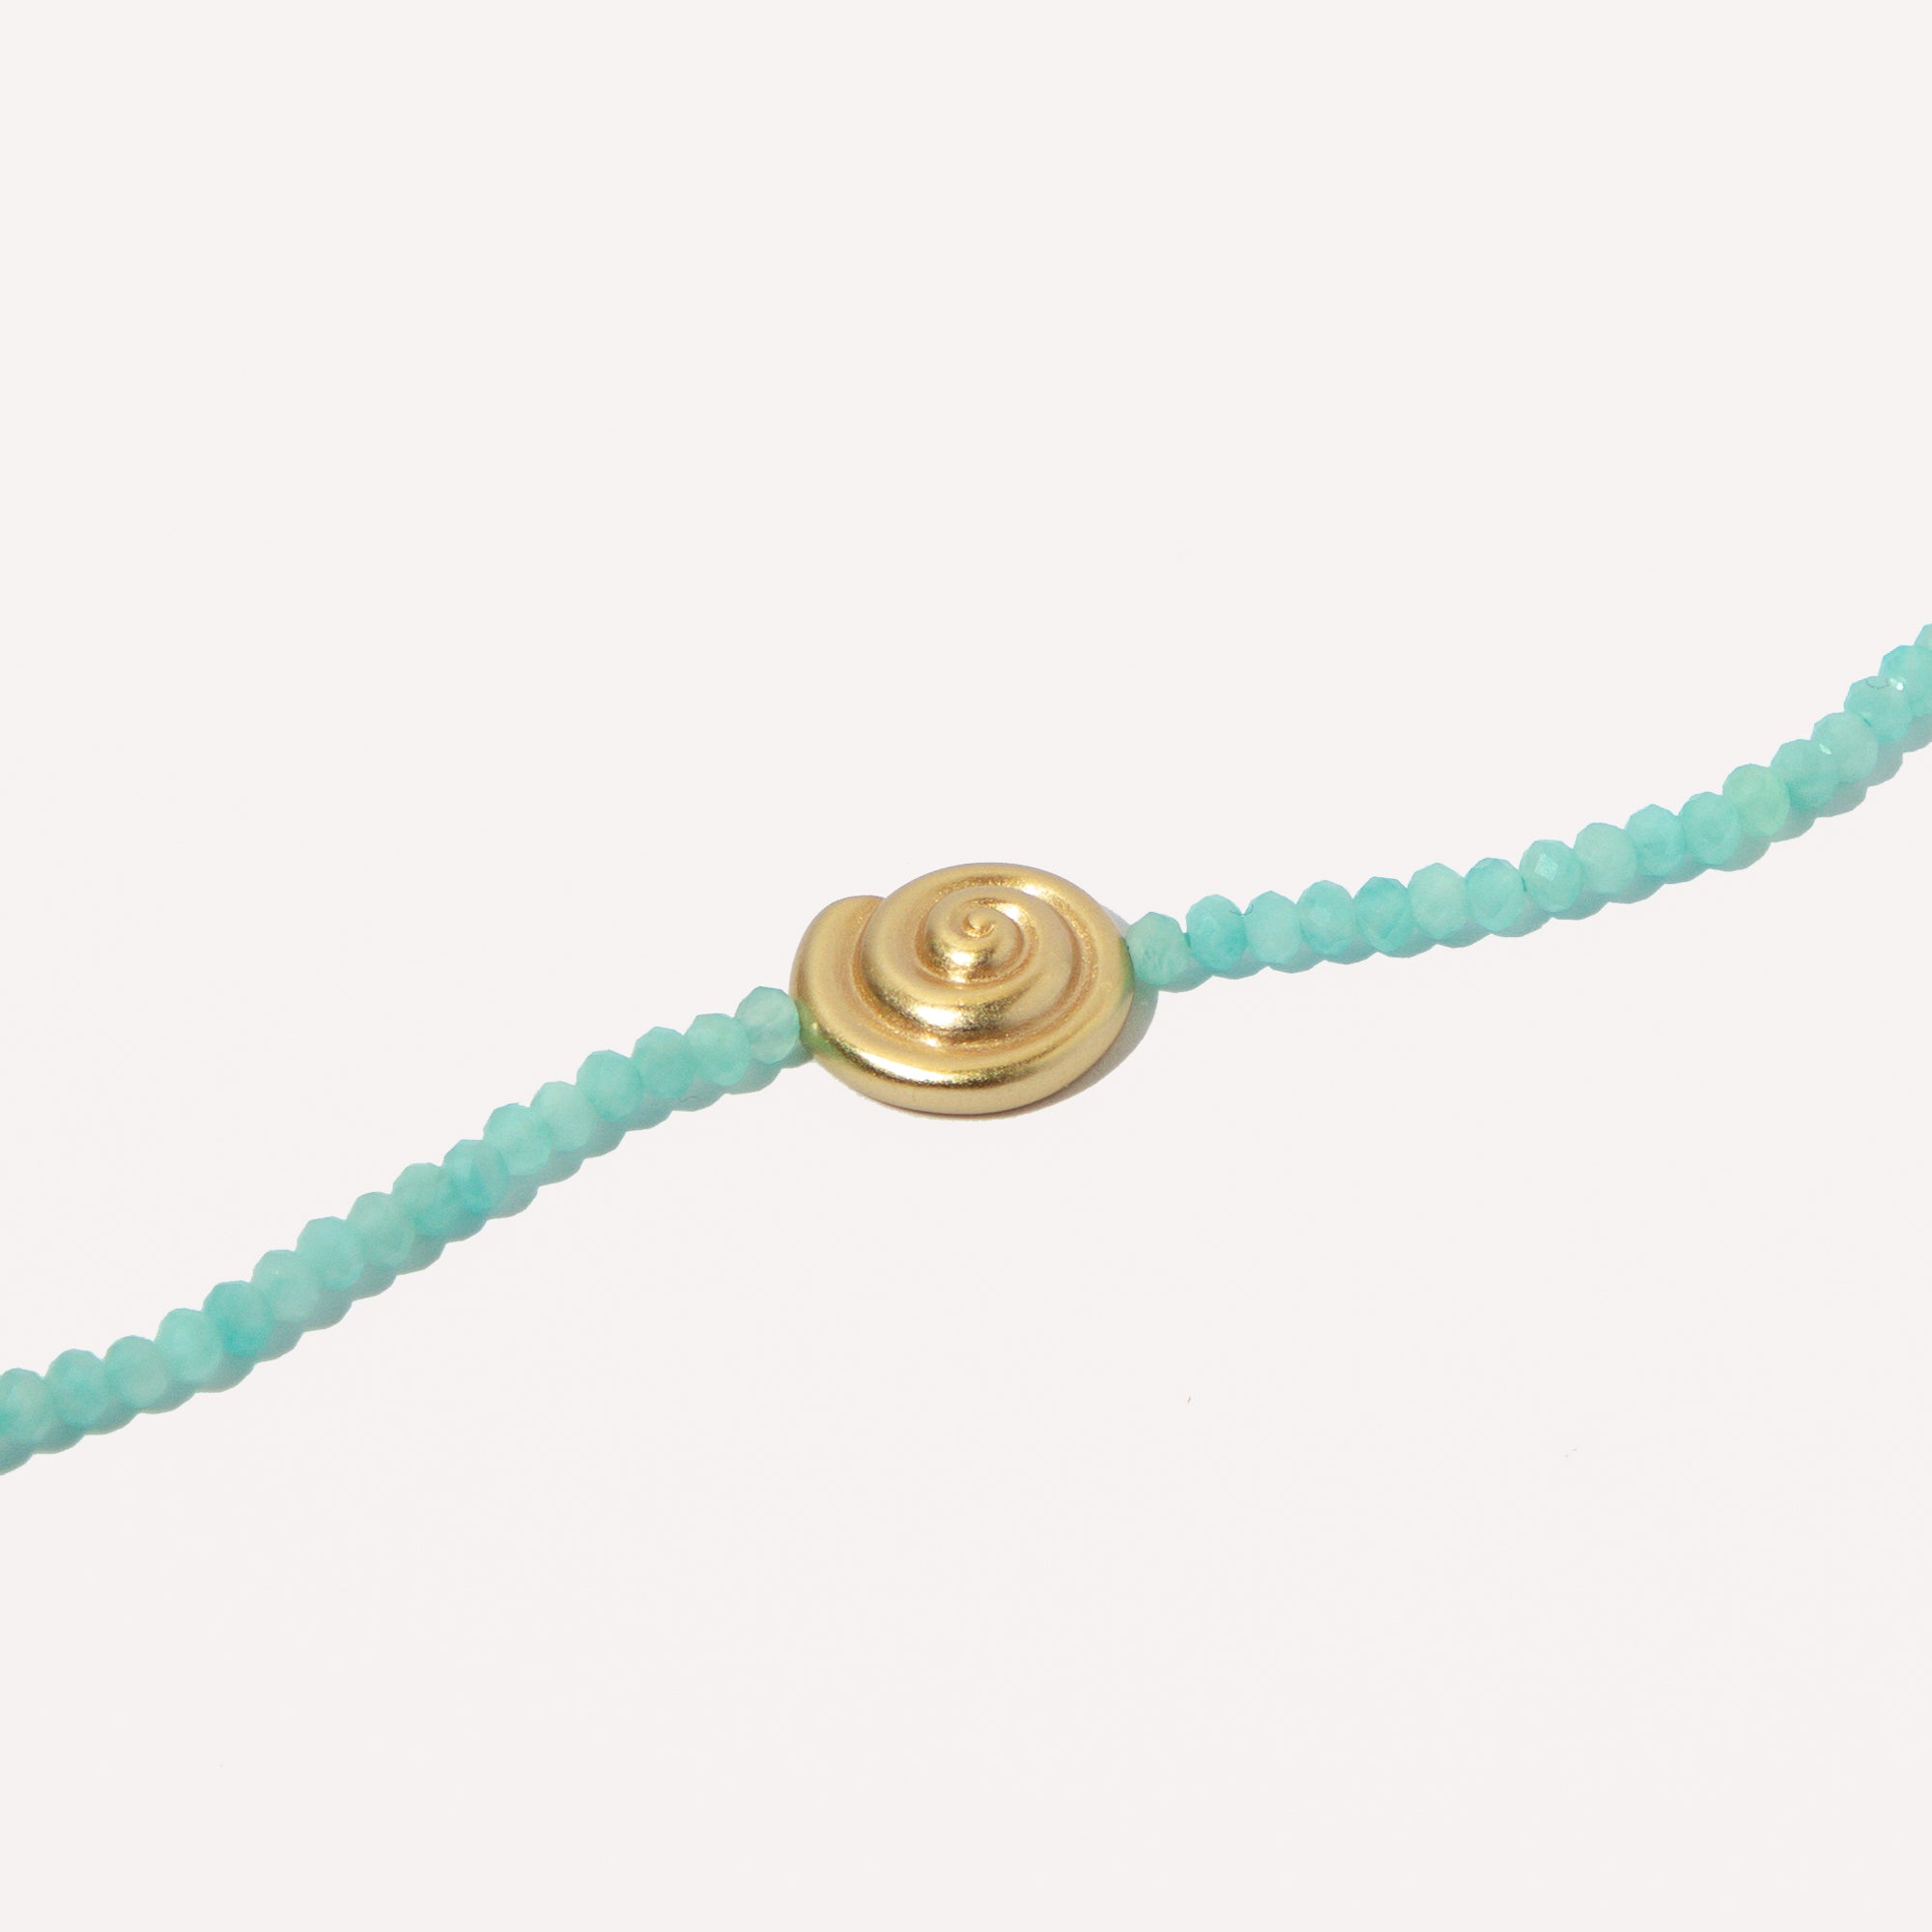 Amazonite Shell Anklet in Gold